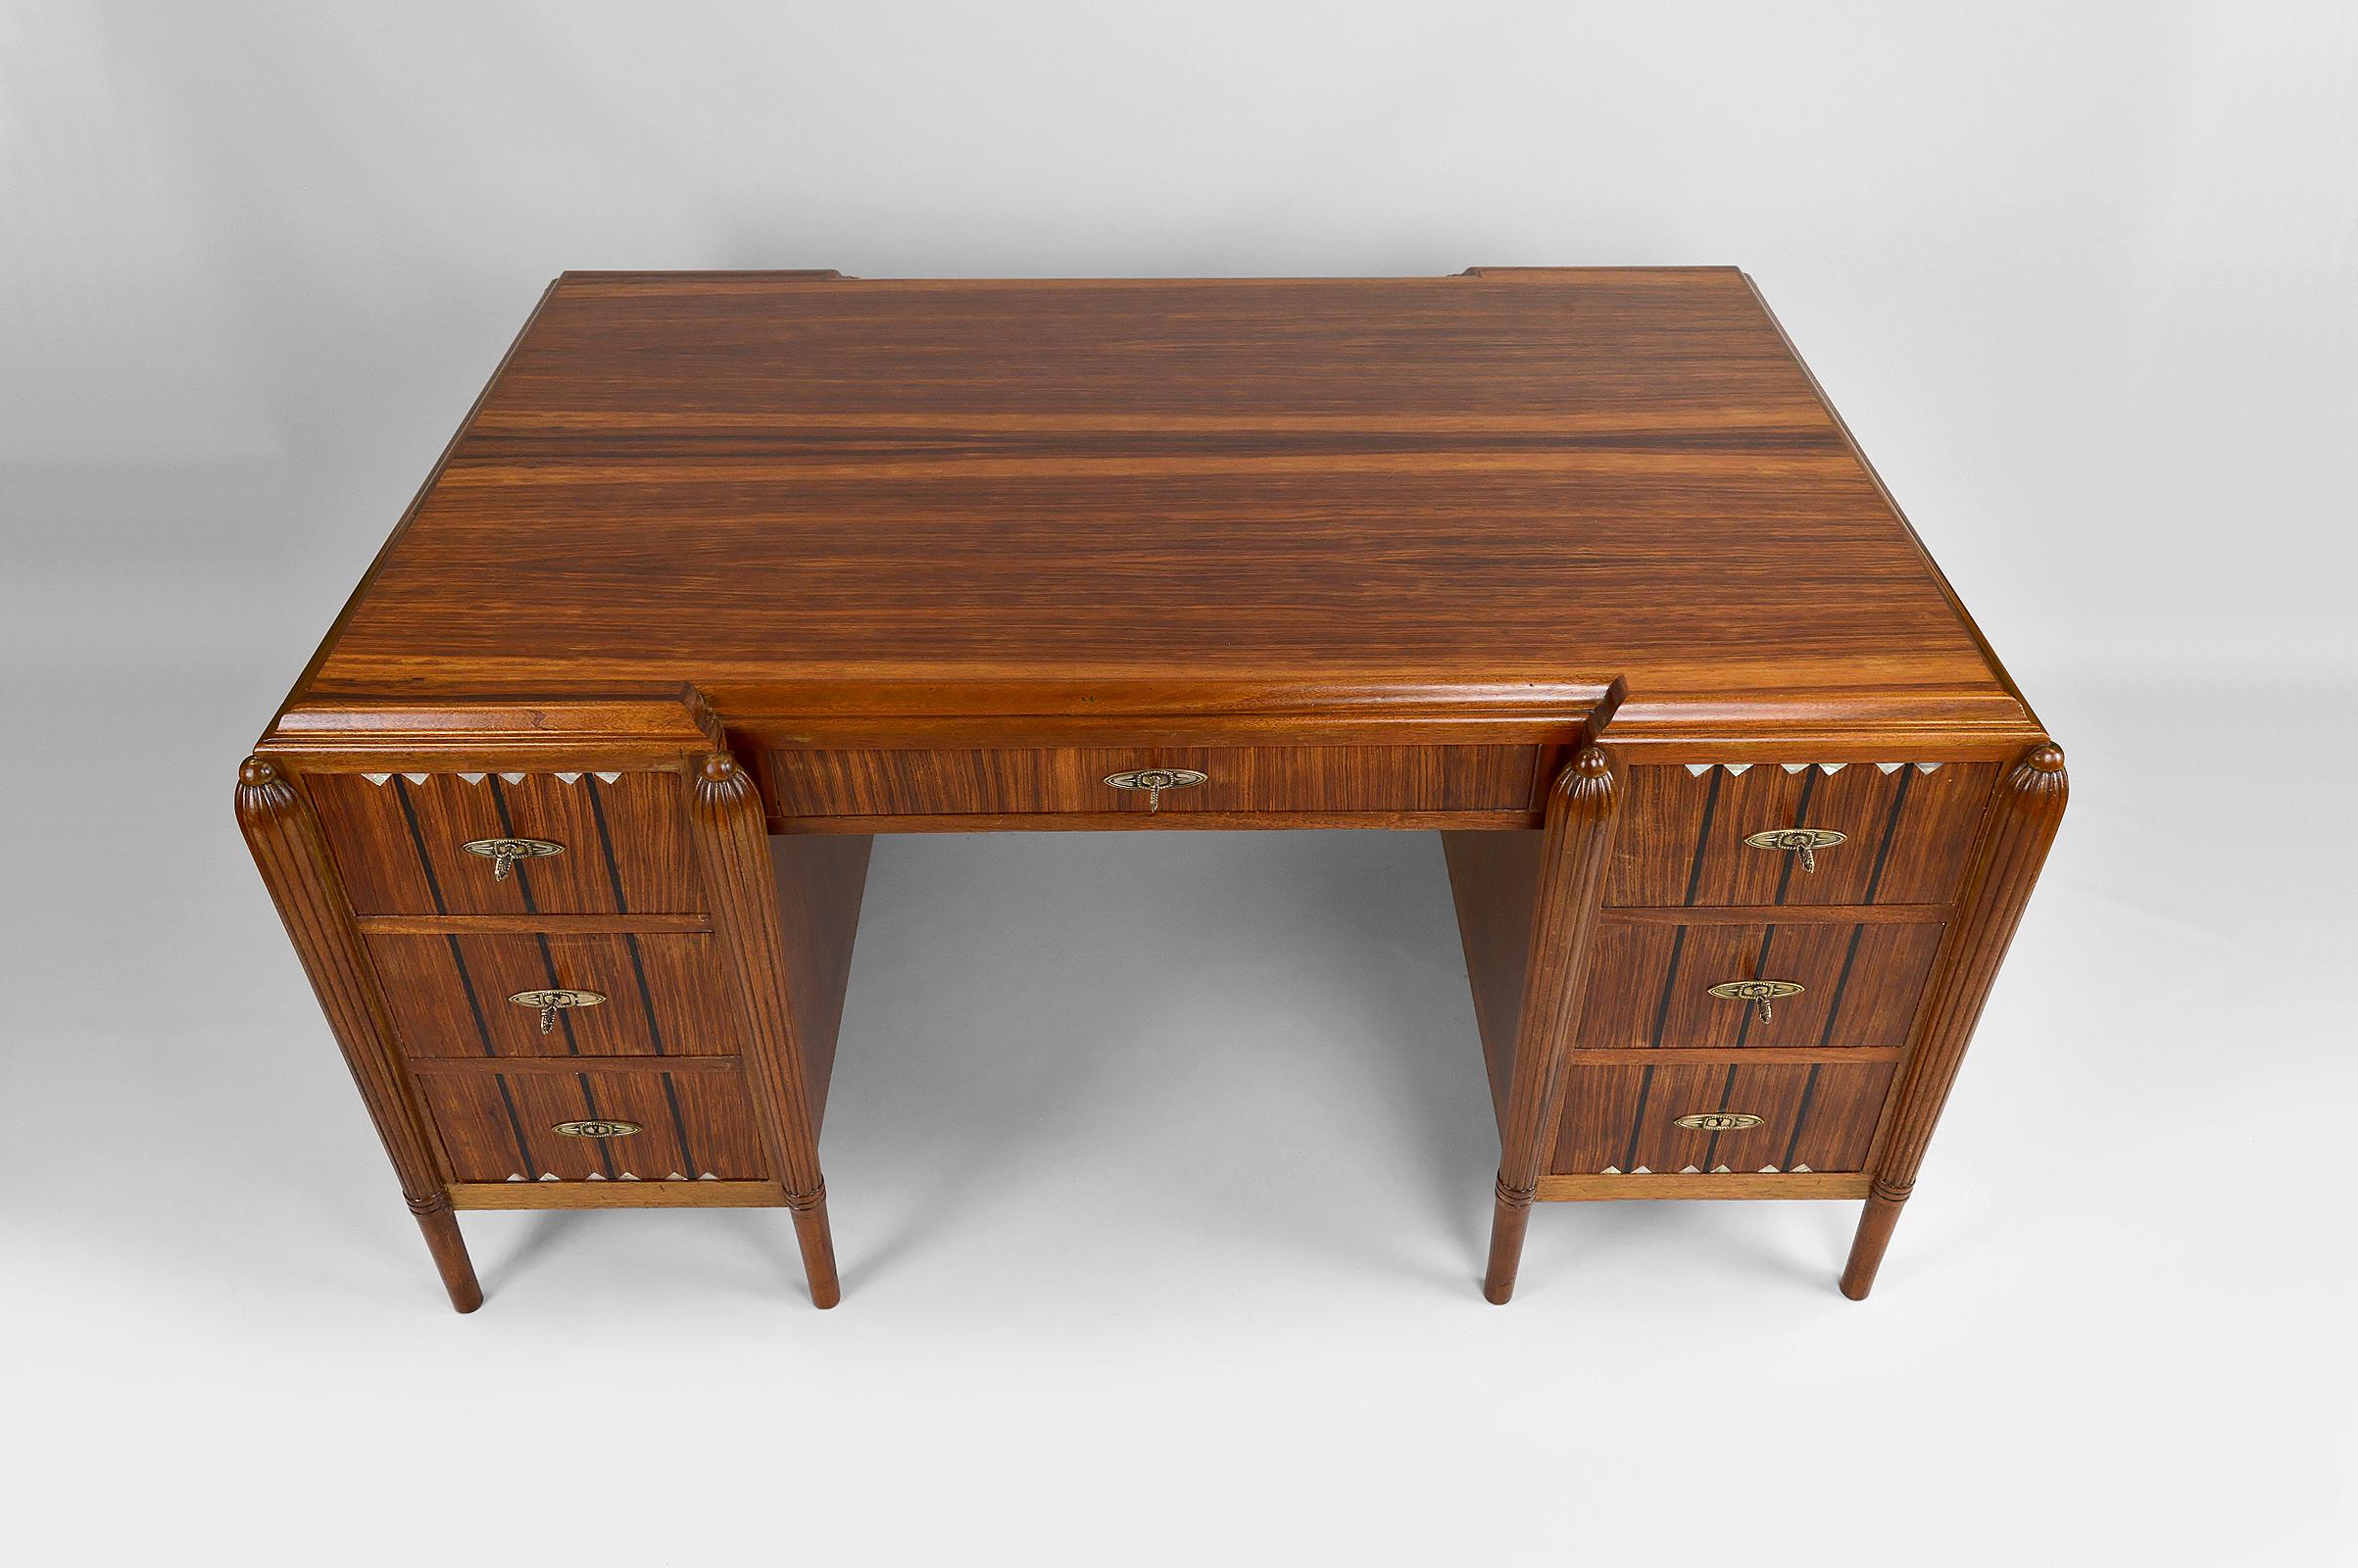 Large and important Art Deco pedestal desk.

Rosewood structure with elegant mother-of-pearl and ebony inlays.
Tapered and fluted legs.
Nickel-plated / silvered bronze keyholes and keys.

1 central drawer and 6 side drawers.
6 keys present.